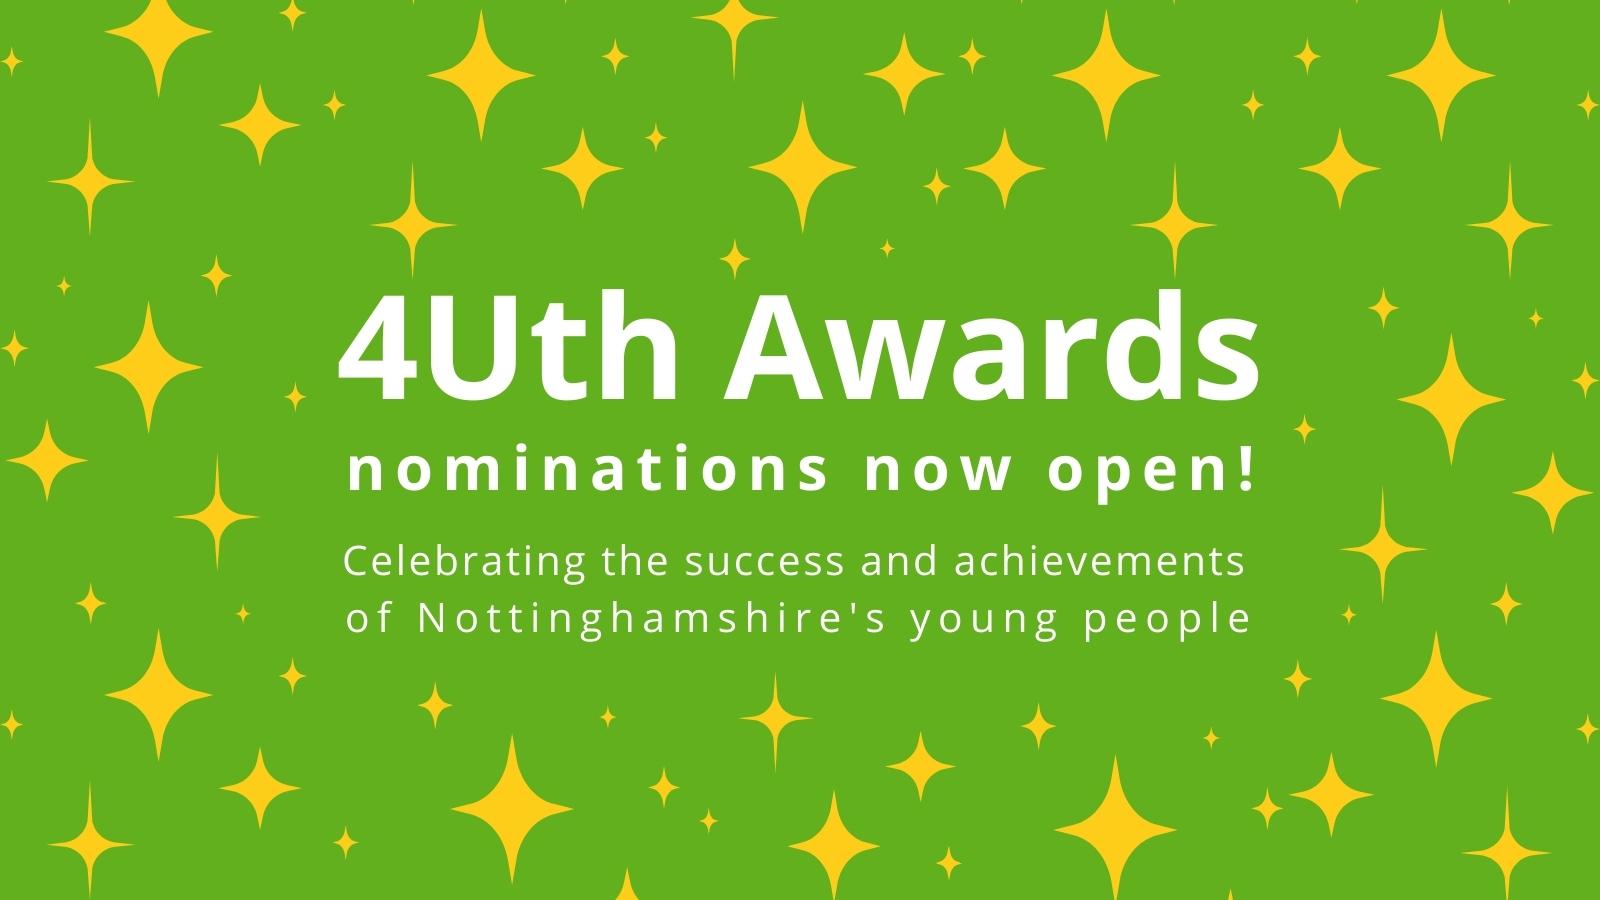 Green graphic with gold stars. Text says: 4Uth Awards nominations now open! Celebrating the success and achievements of Nottinghamshire's young people.